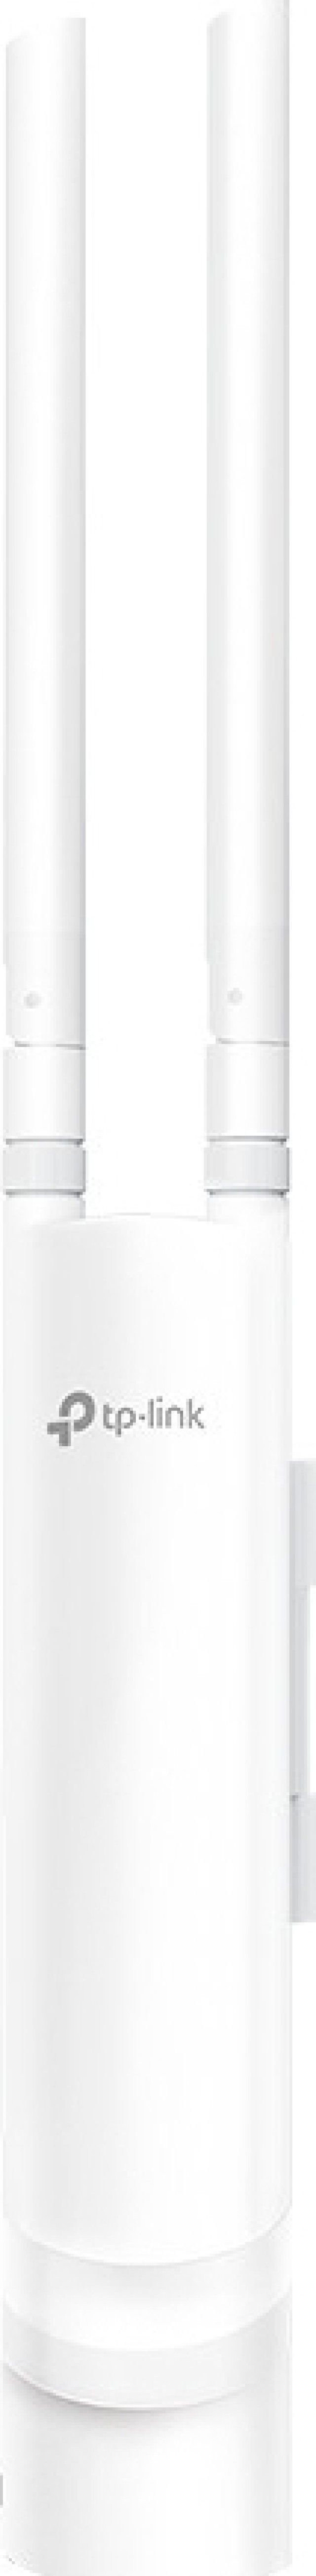 TP-LINK EAP110-Outdoor v3 Access Point Wi Fi 4 Single Band (2.4 GHz) per installazione all'aperto